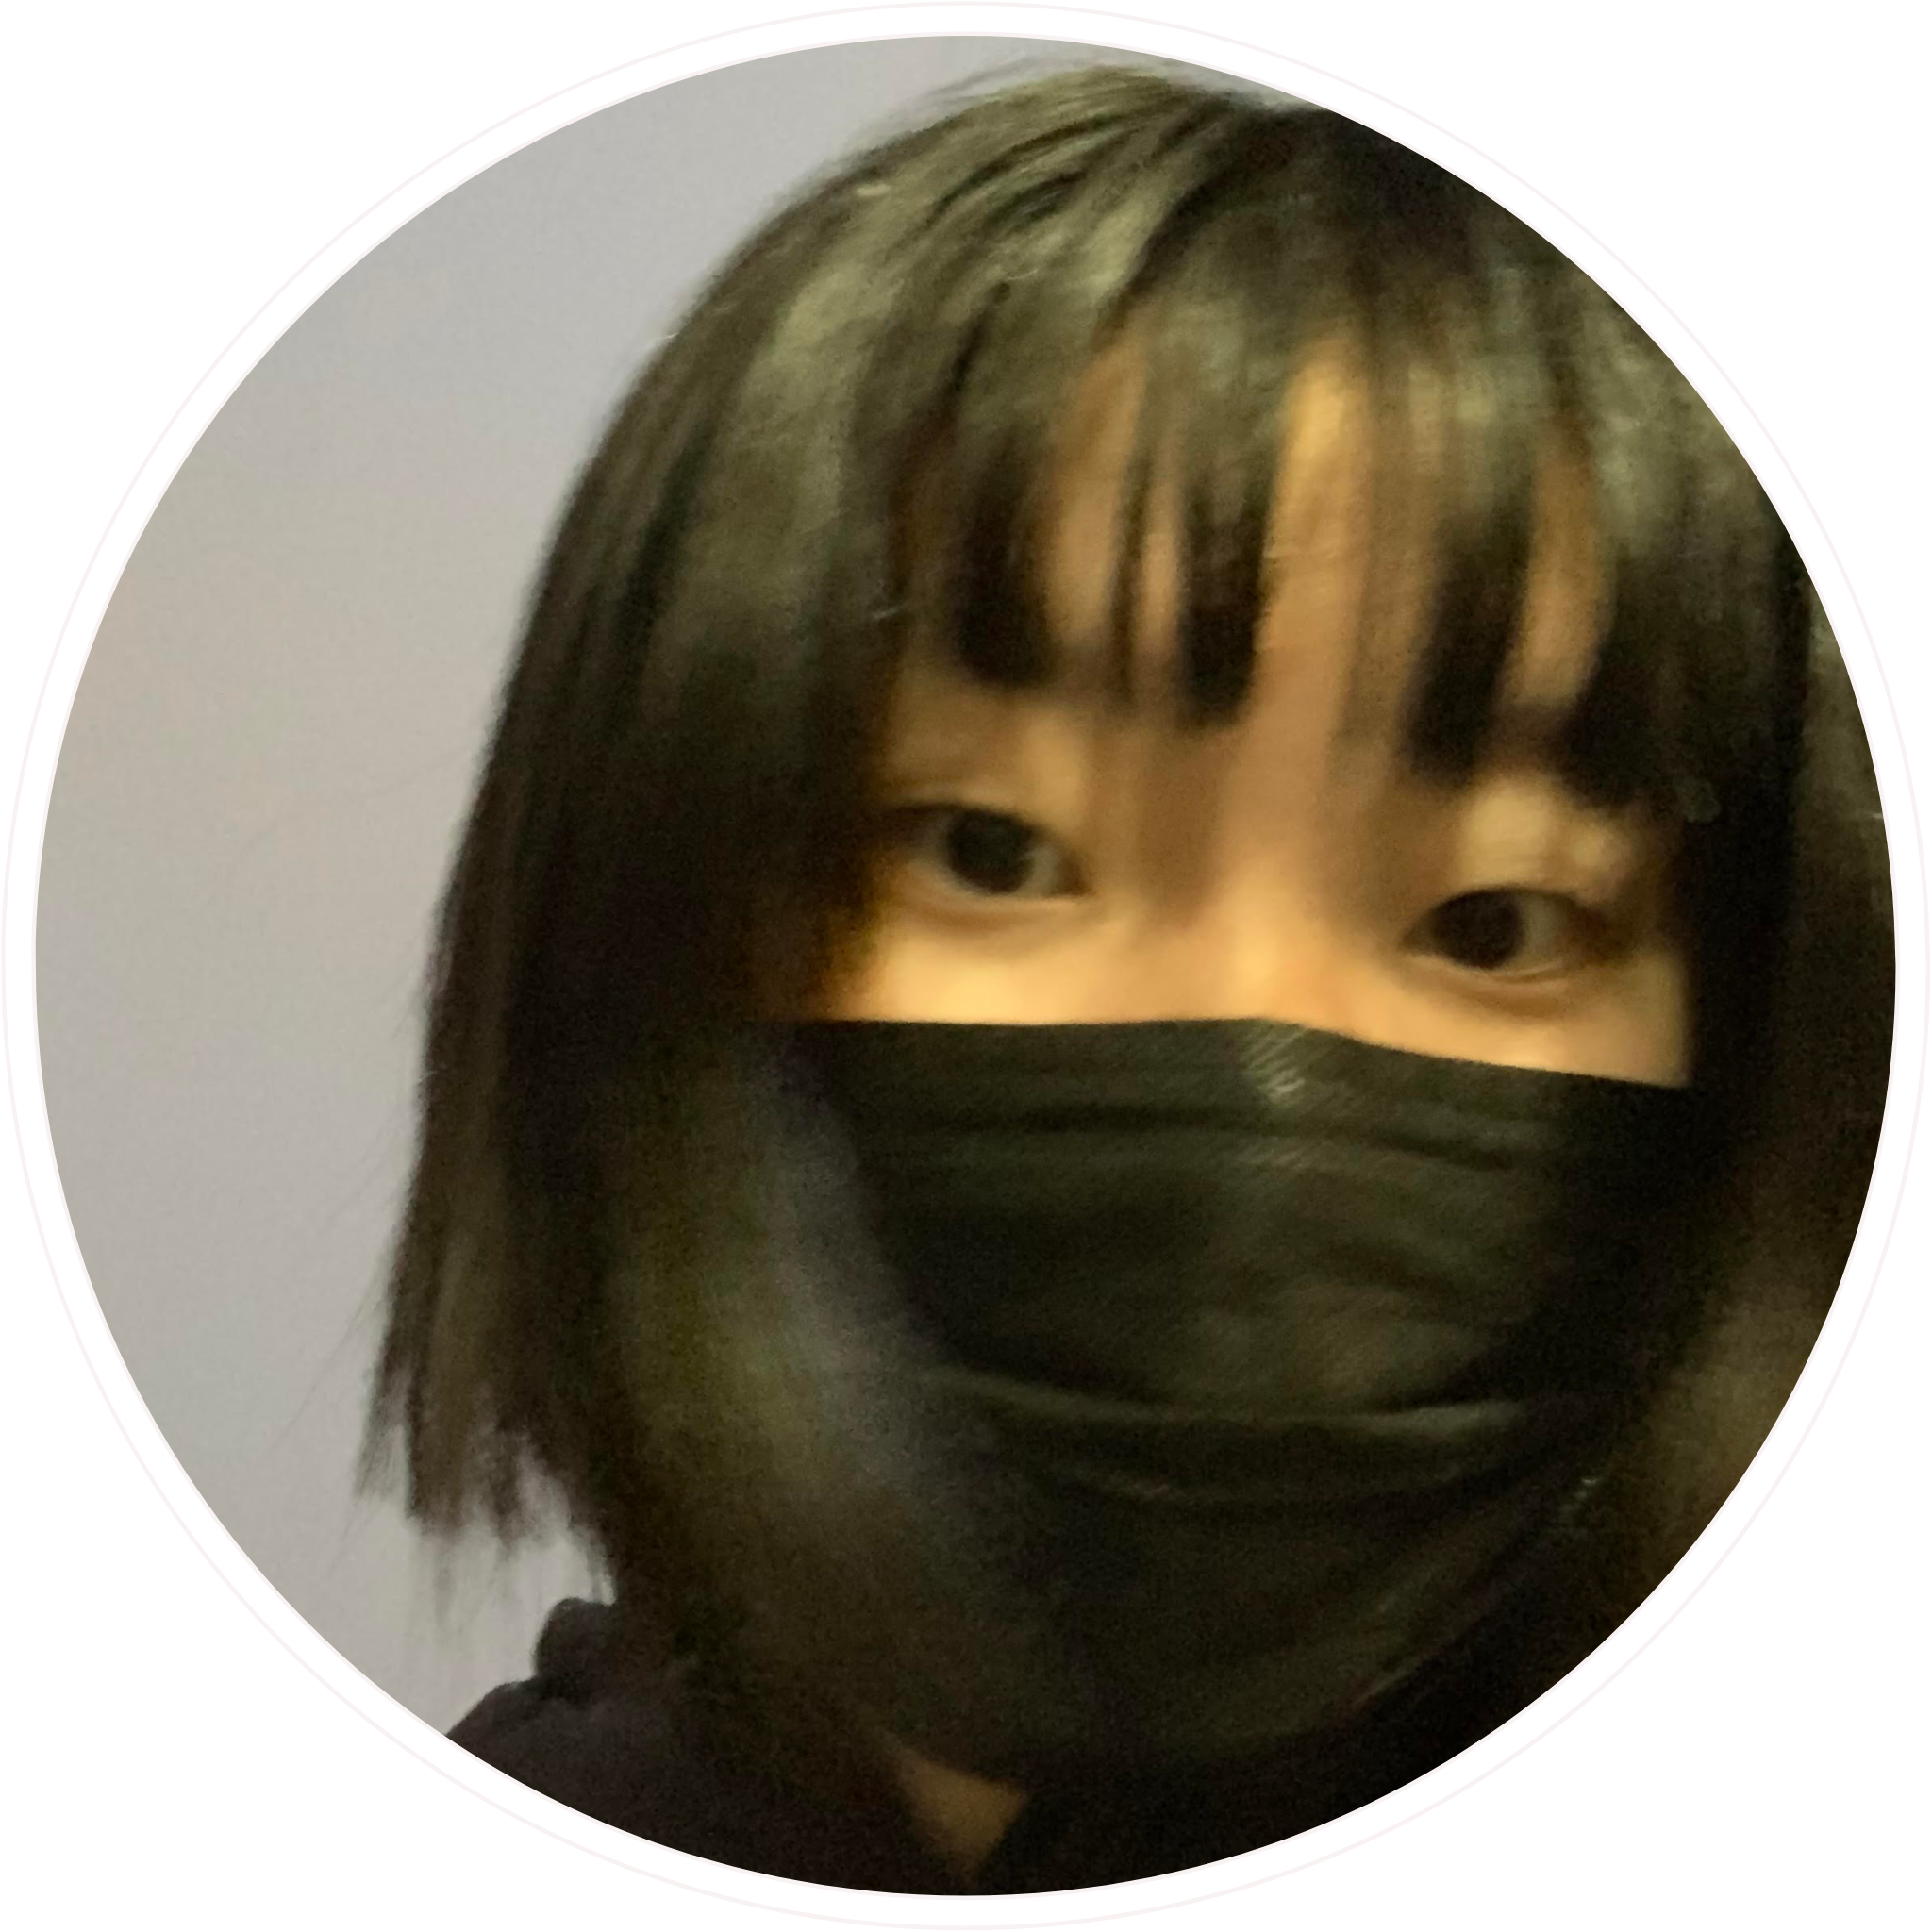 Girl with short, black hair wearing a mask against a gray background